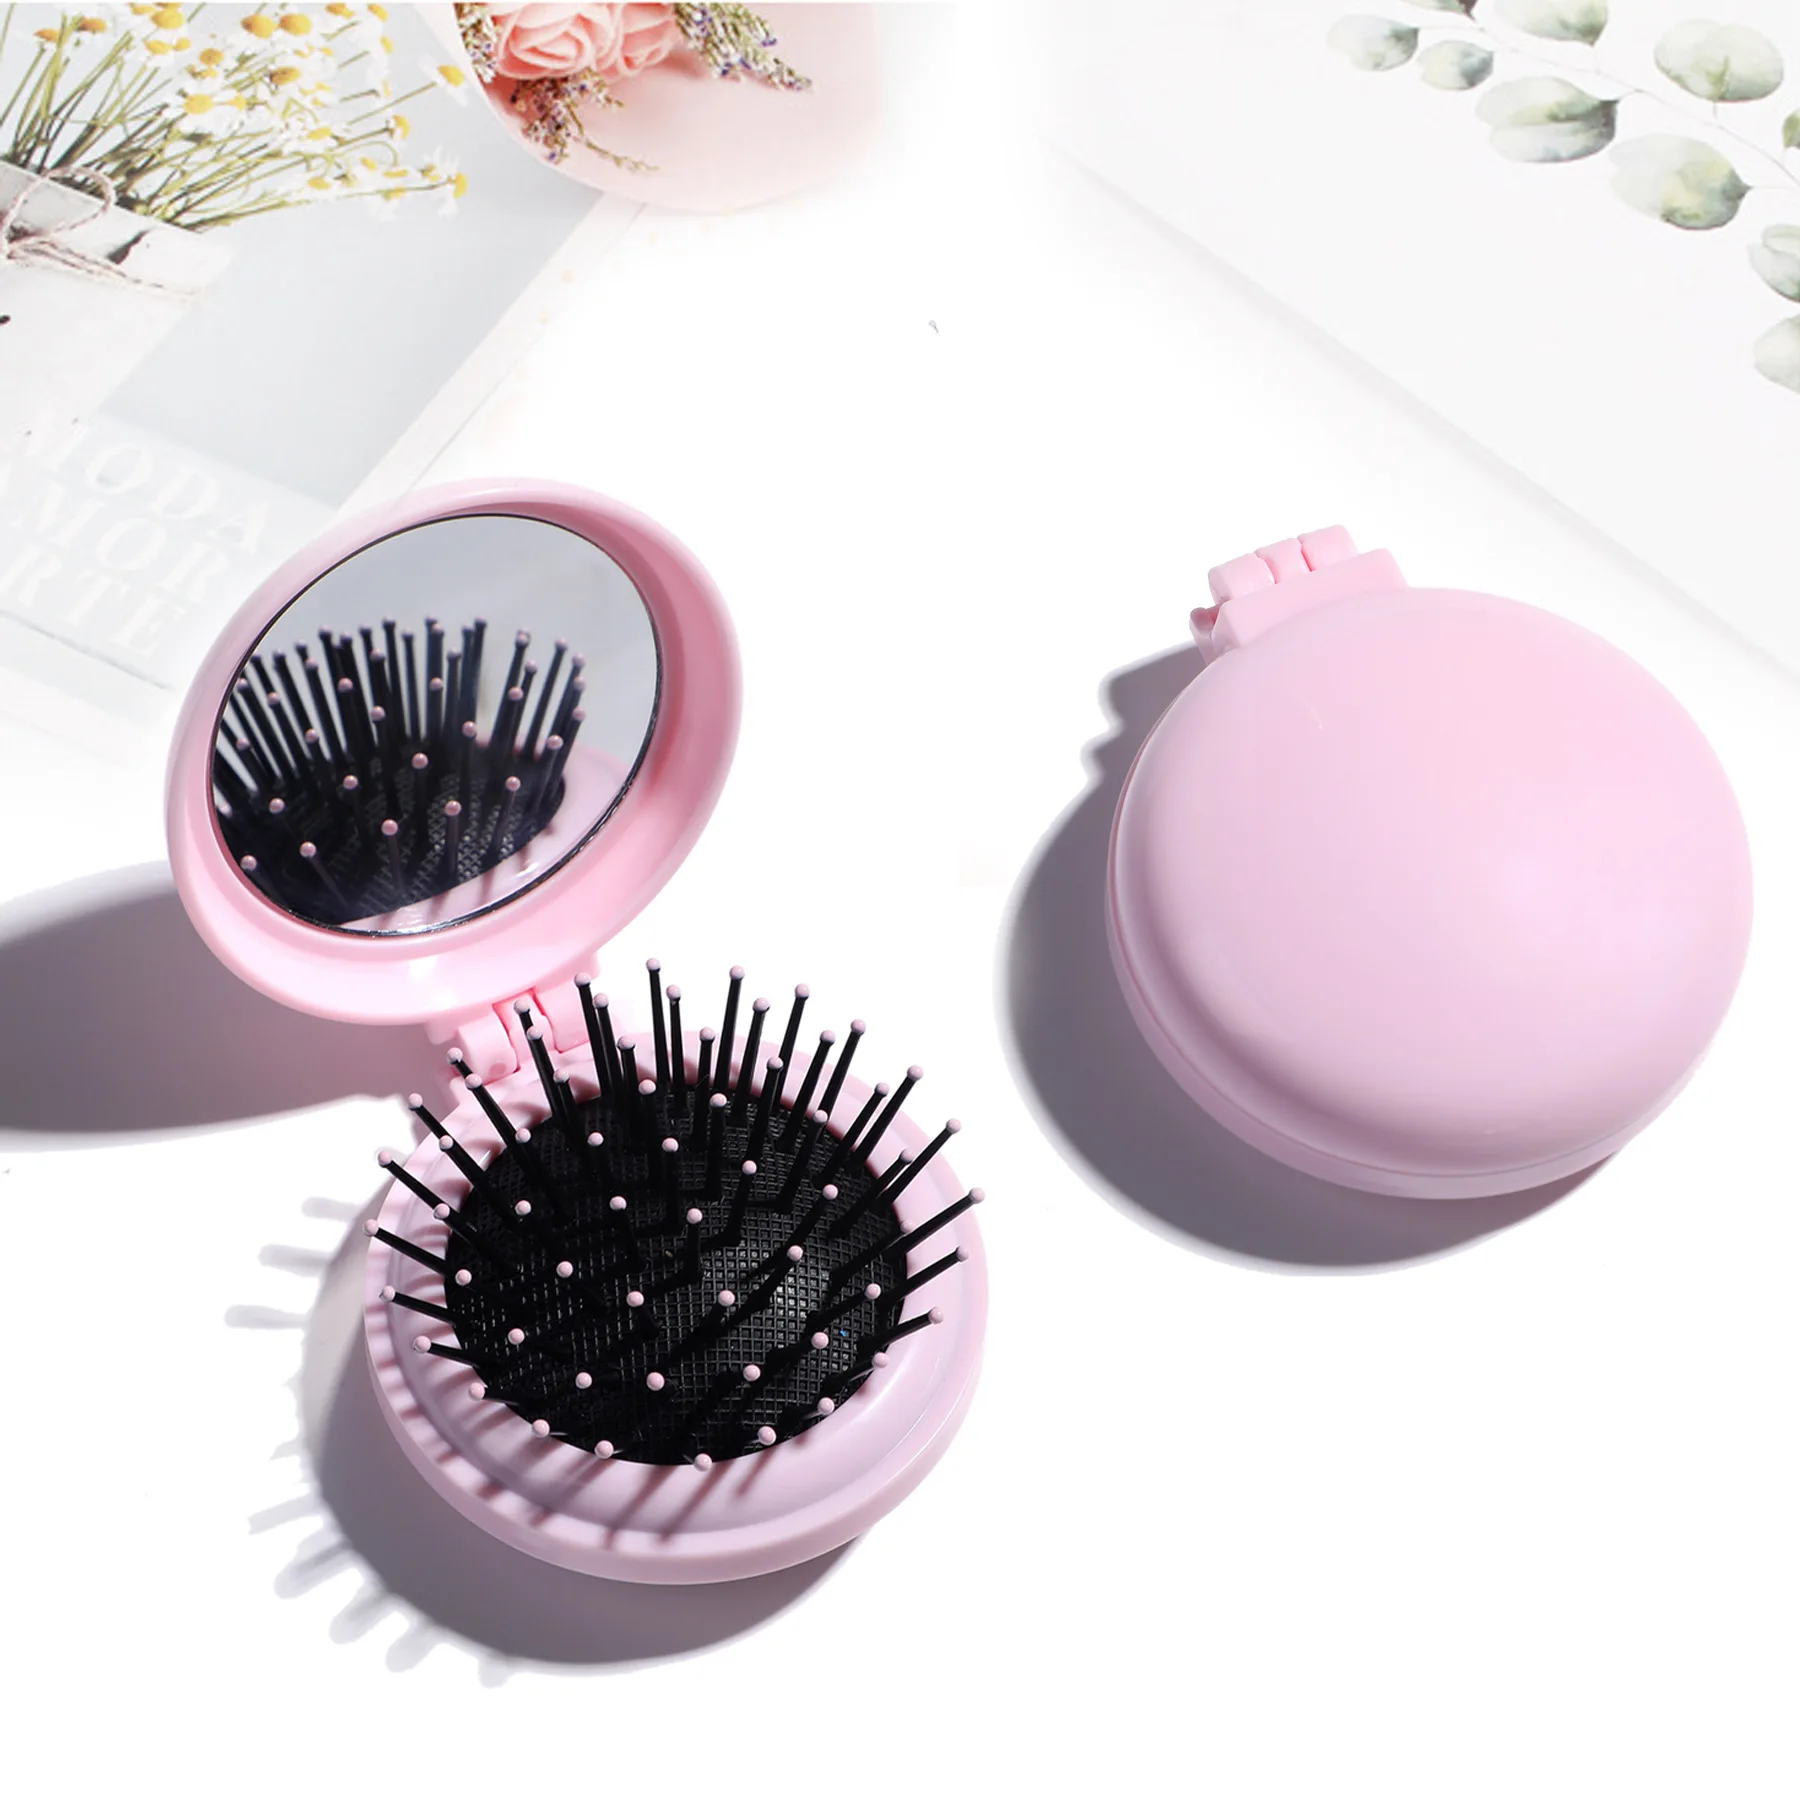 H8298d51c9b624681a08ceecb32cf97b8v Mini Pocket Mirror Cute Massage Folding Mirror with Comb Portable Pocket Small Travel Girl Hair Brush with Mirror Styling Tools